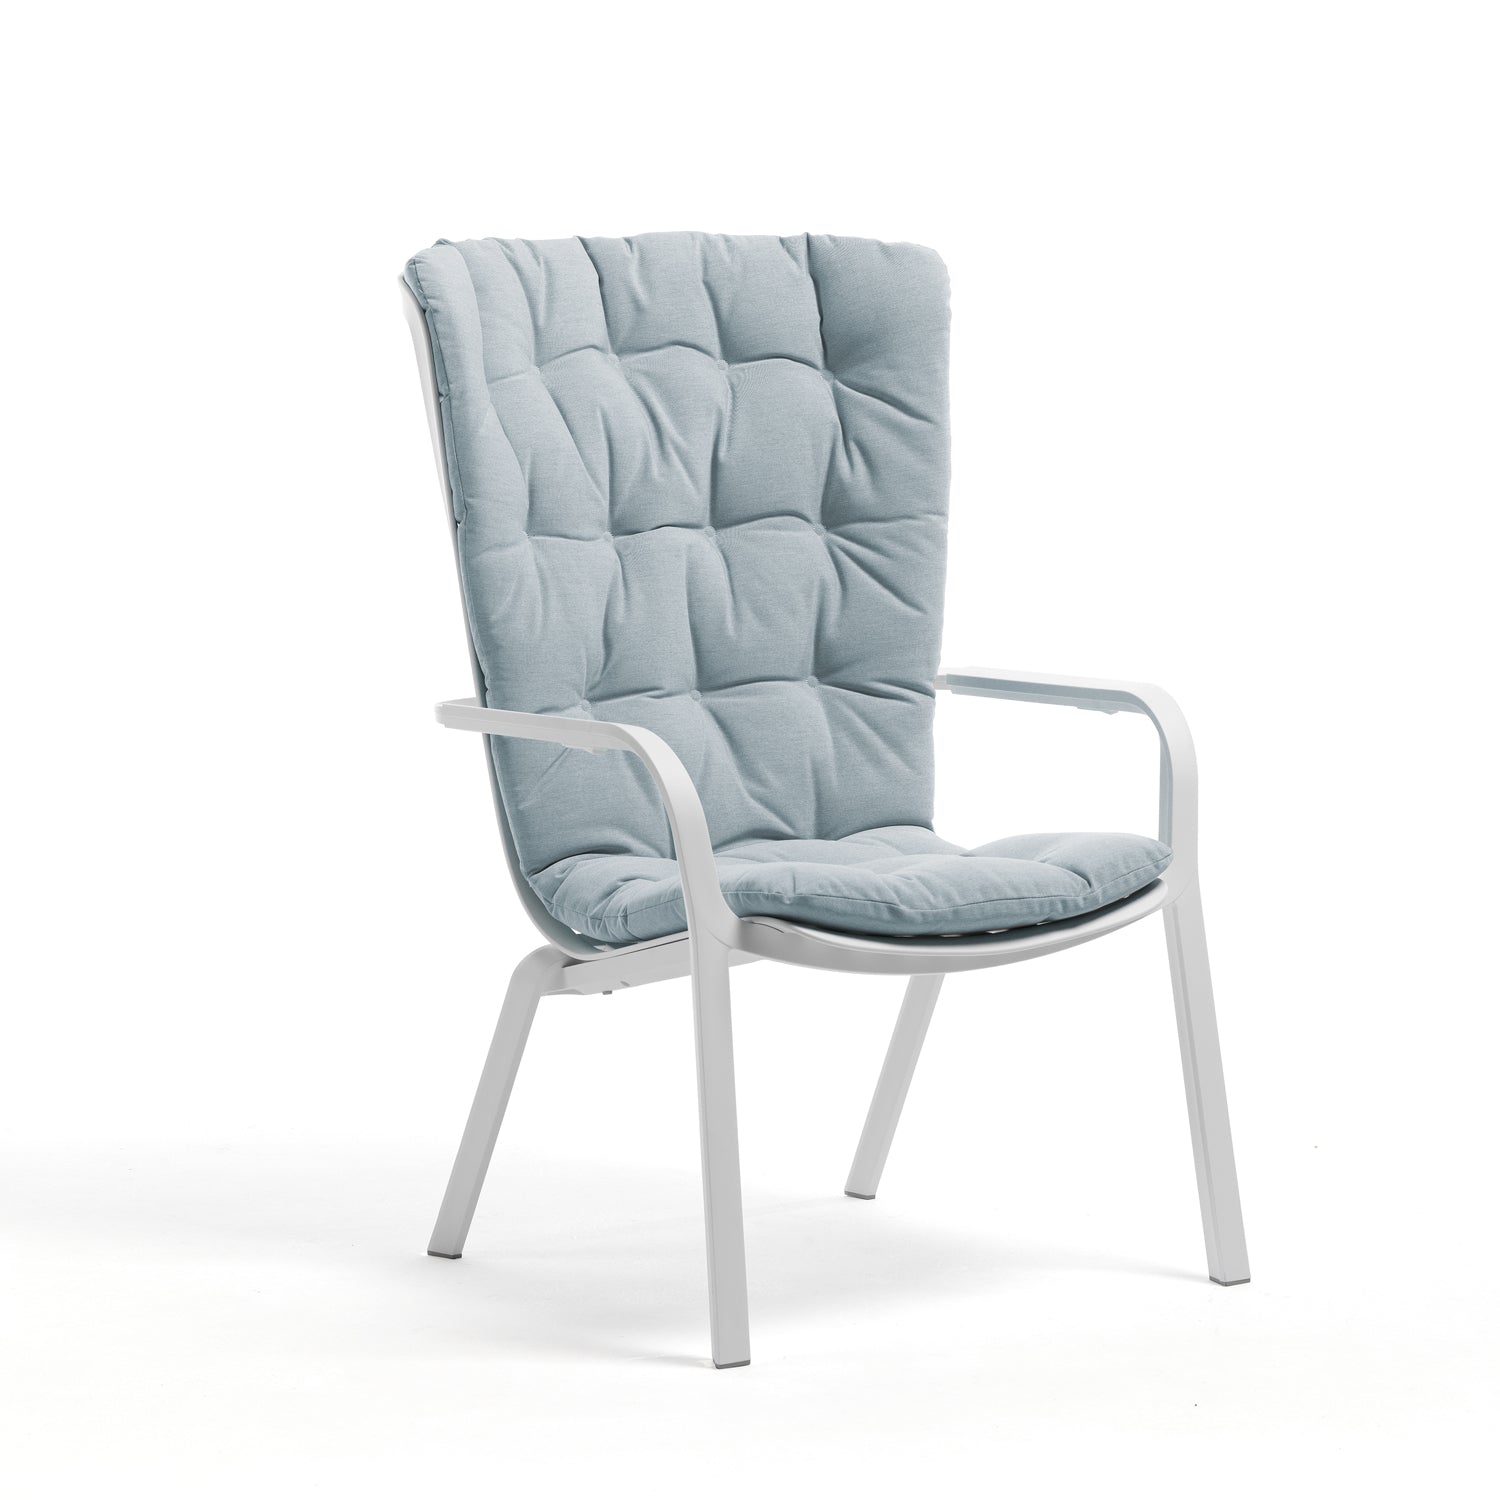 Folio Armchair In White With Sky Blue Cushion